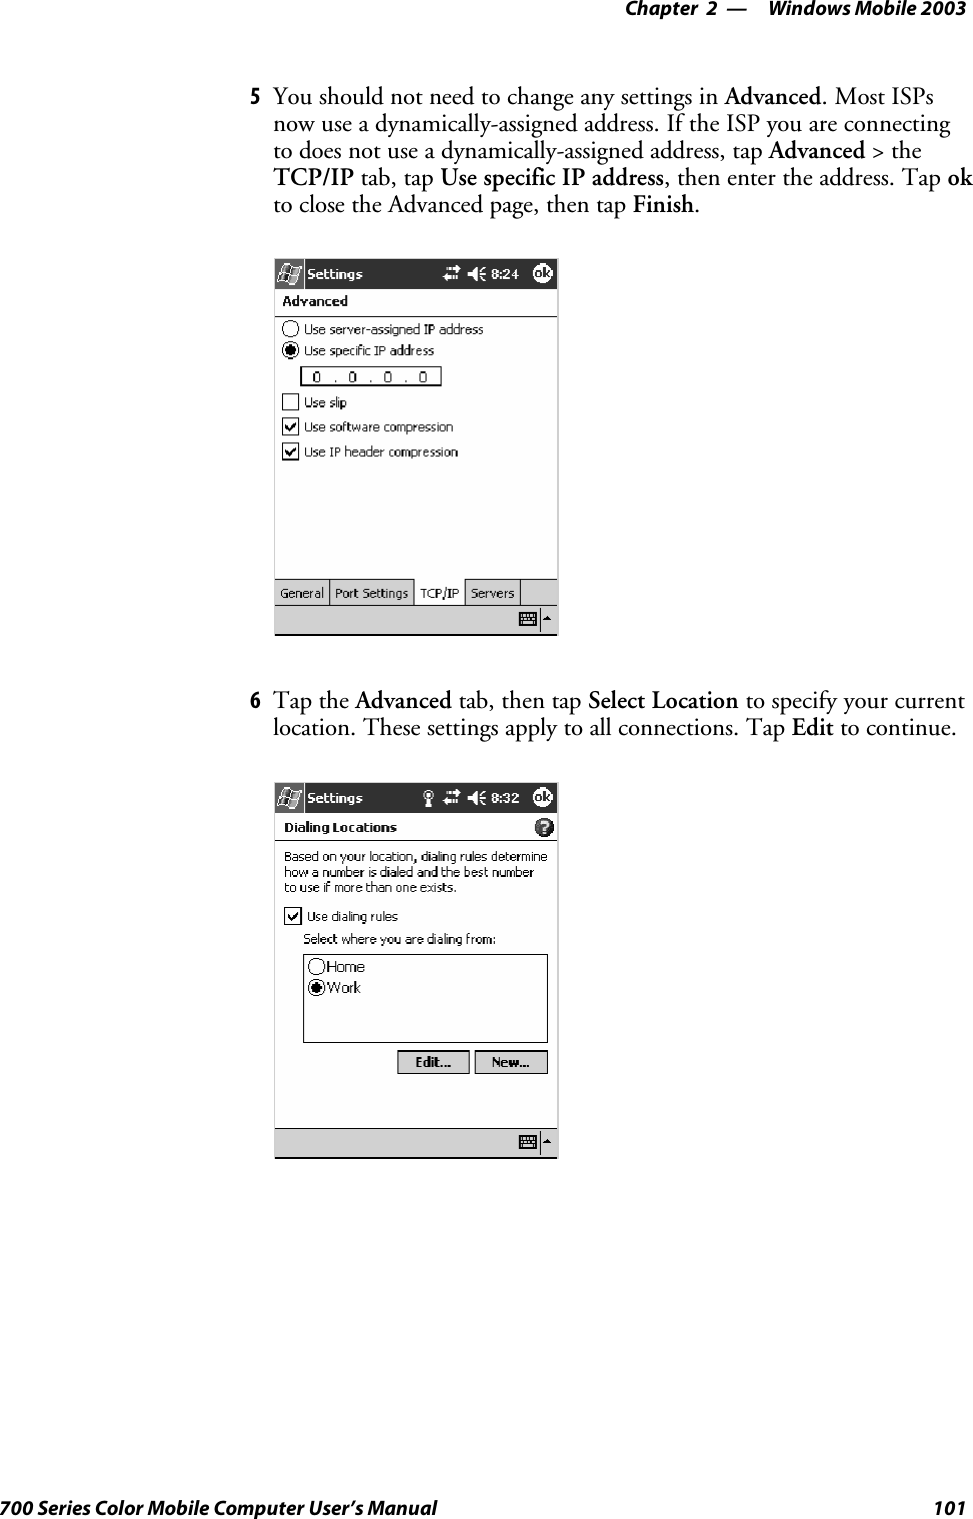 Windows Mobile 2003—Chapter 2101700 Series Color Mobile Computer User’s Manual5You should not need to change any settings in Advanced. Most ISPsnow use a dynamically-assigned address. If the ISP you are connectingto does not use a dynamically-assigned address, tap Advanced &gt;theTCP/IP tab, tap Use specific IP address, then enter the address. Tap okto close the Advanced page, then tap Finish.6Tap the Advanced tab, then tap Select Location to specify your currentlocation. These settings apply to all connections. Tap Edit to continue.